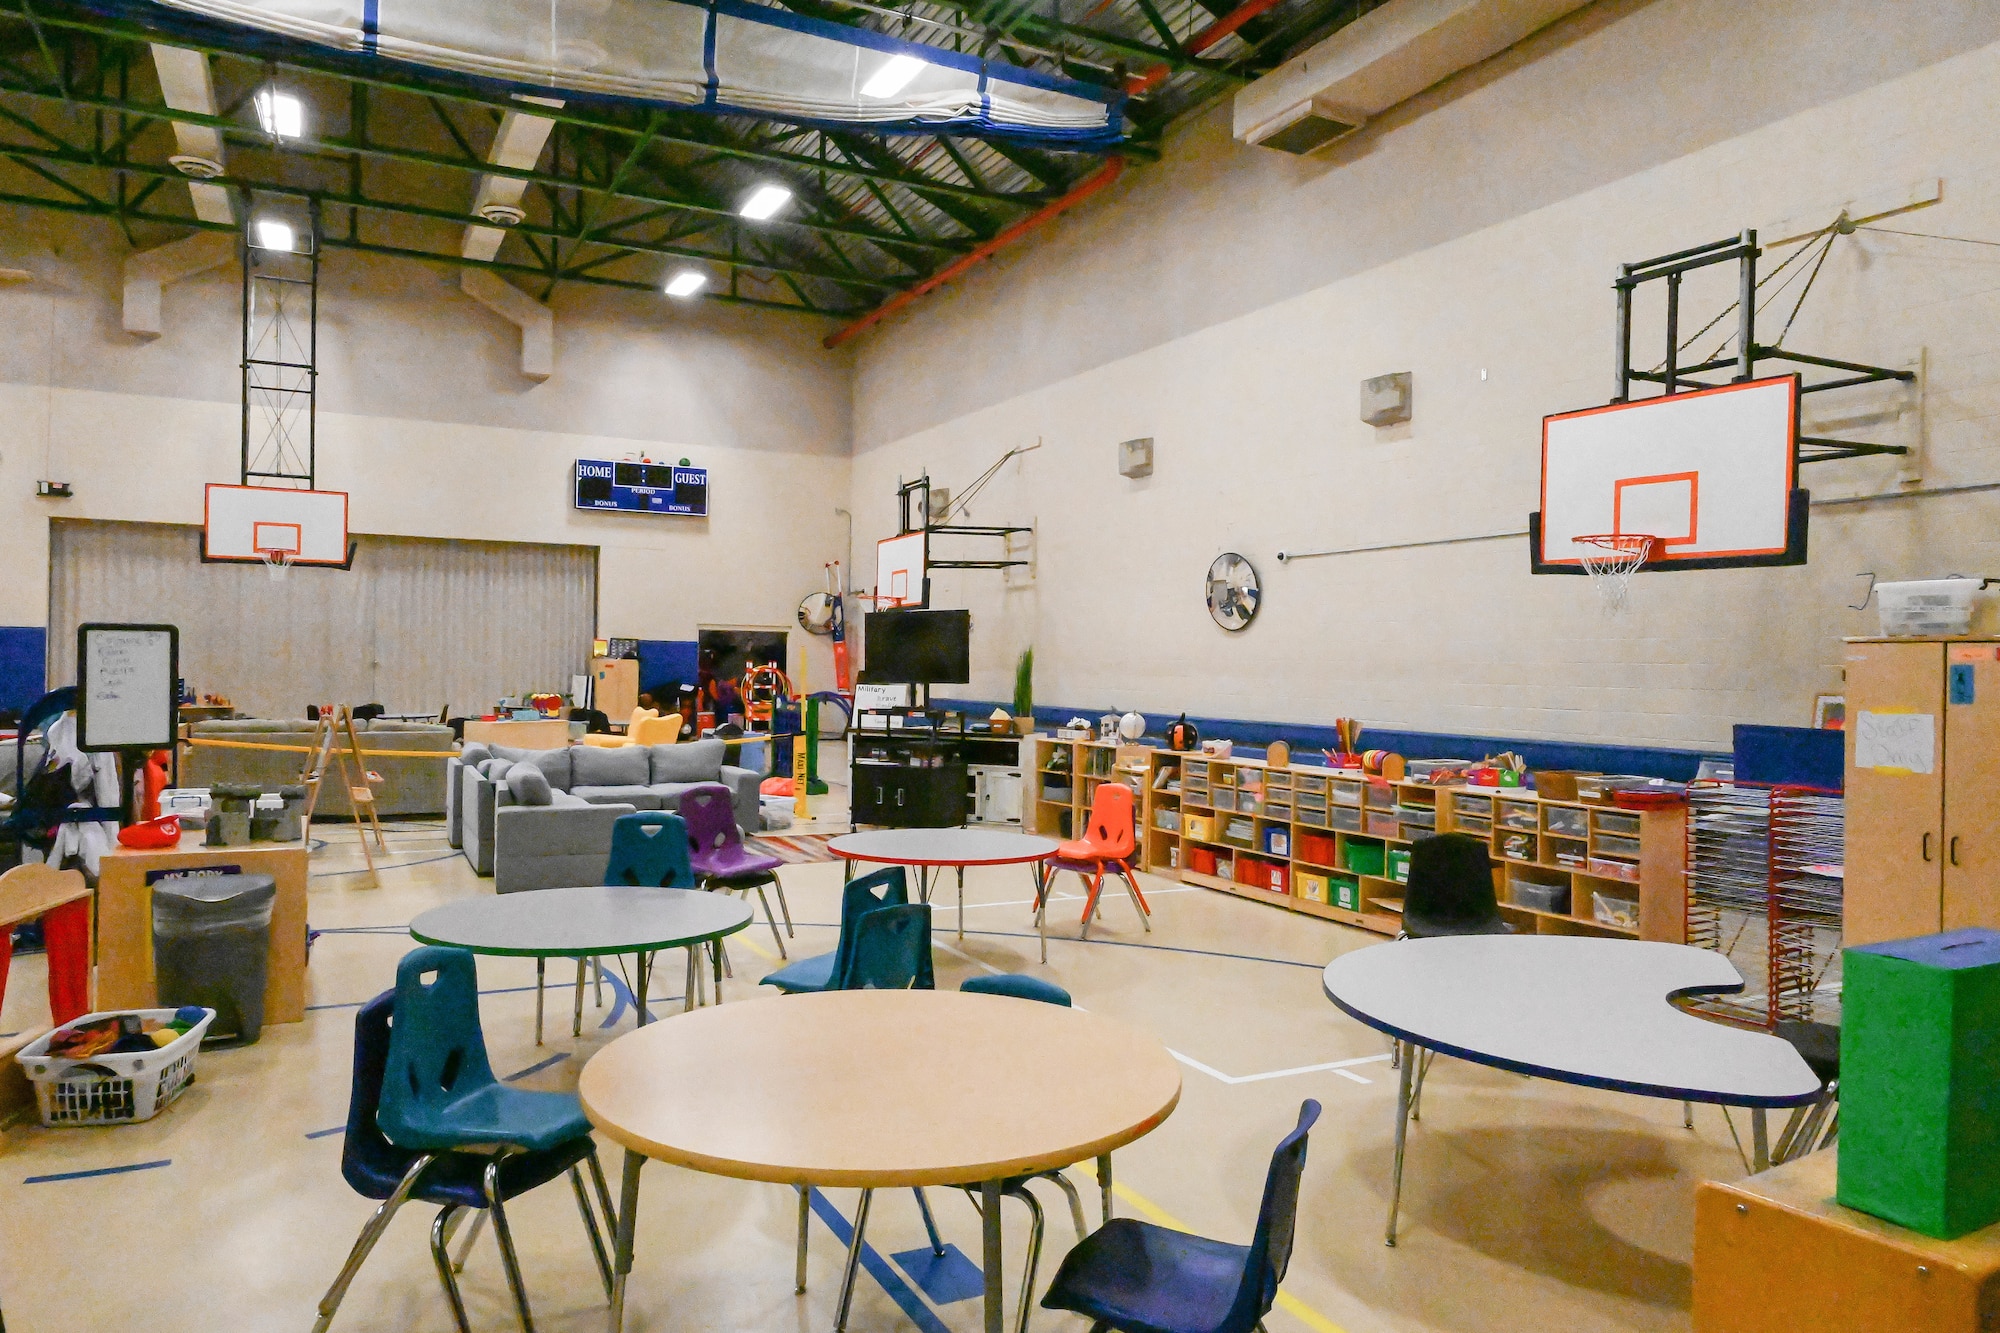 One of the classrooms that have been set up in the Youth Center gymnasium